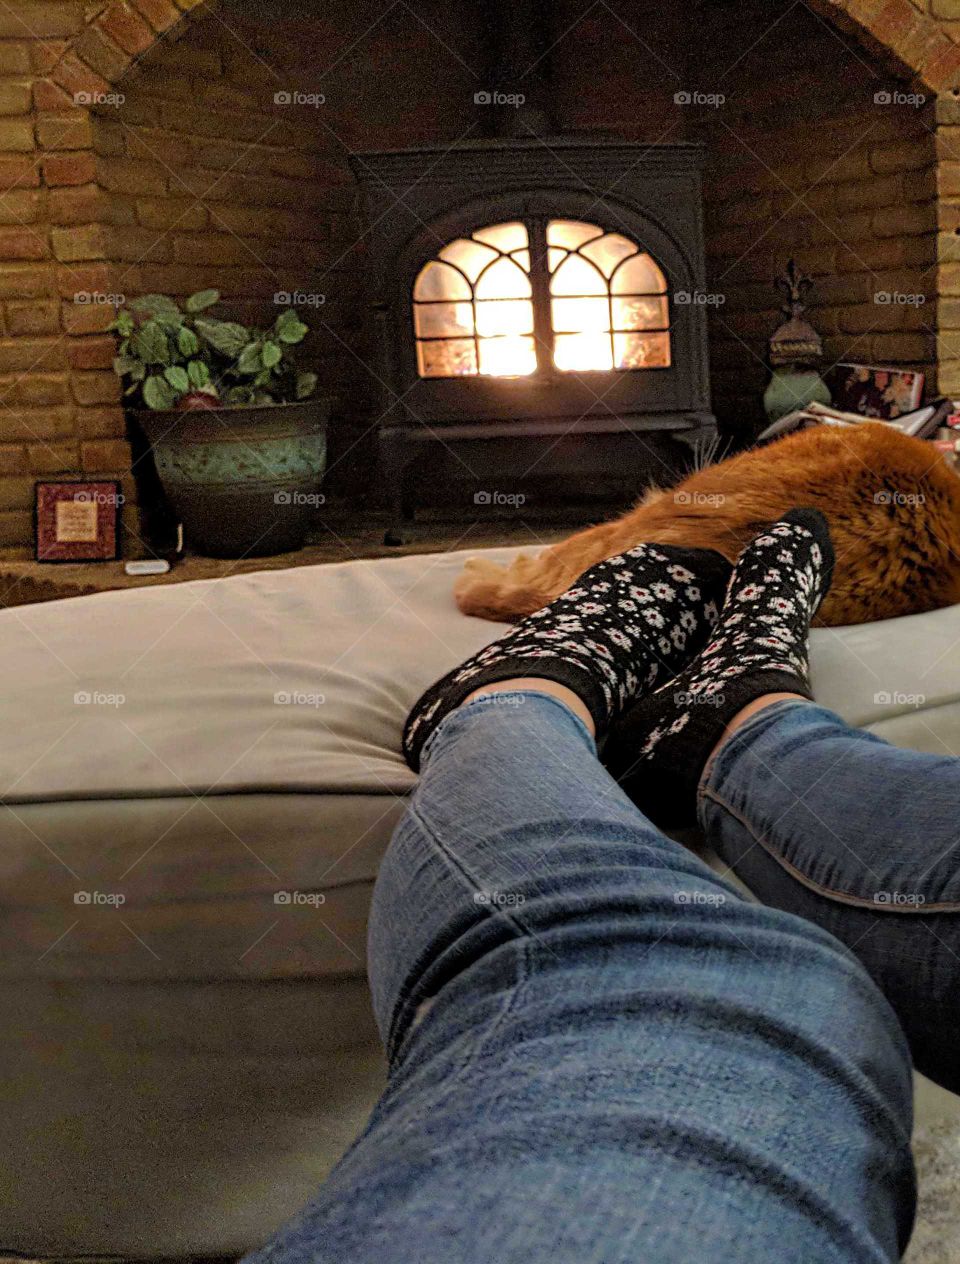 even those cold nights my kitty is still there to warm my feet! 😀